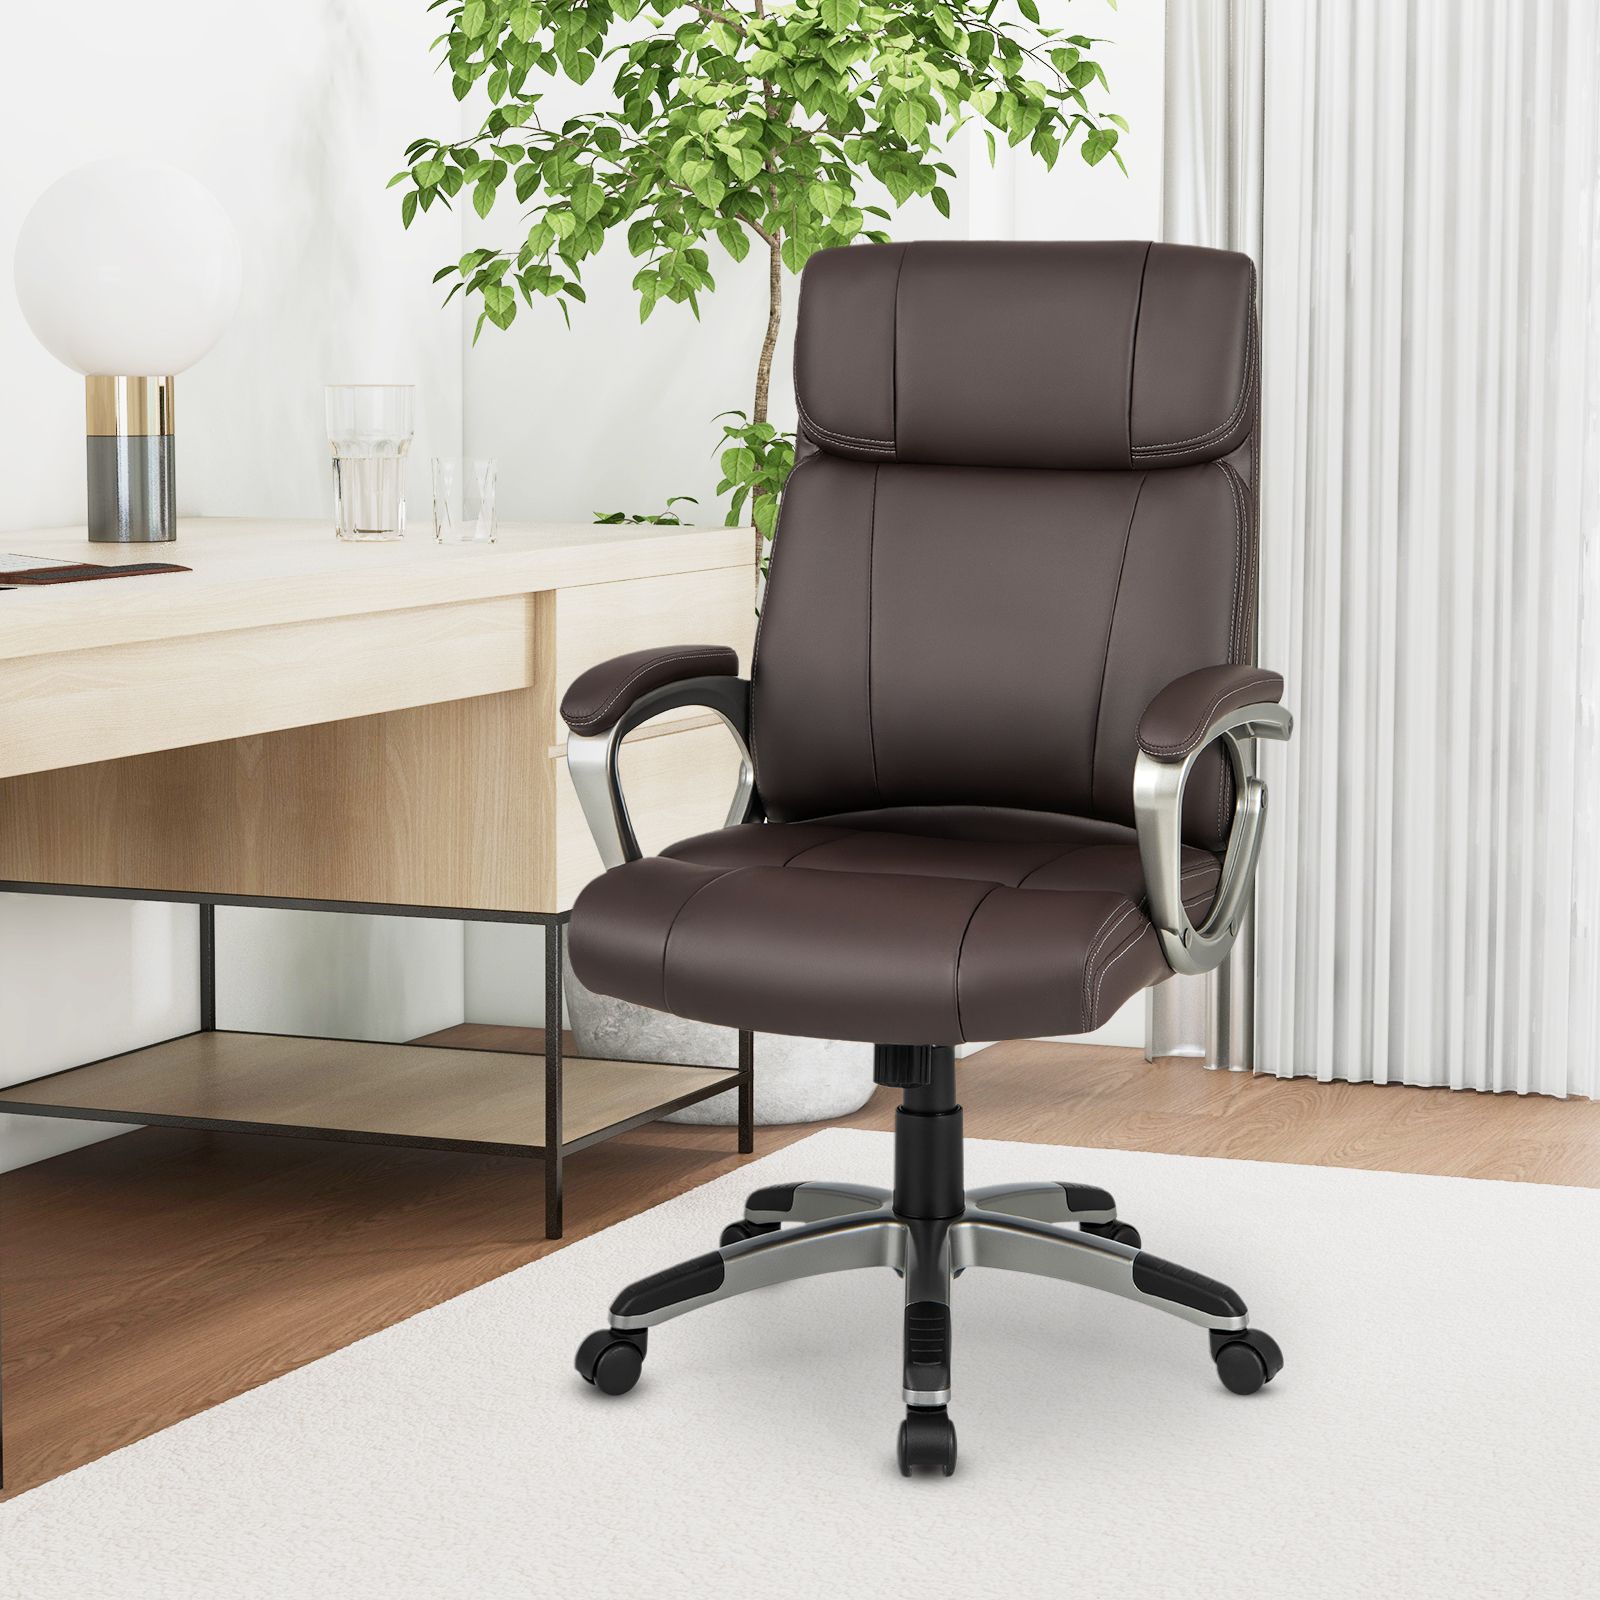 Ergonomic Office Chair with Flip-up Armrests and Rocking Function